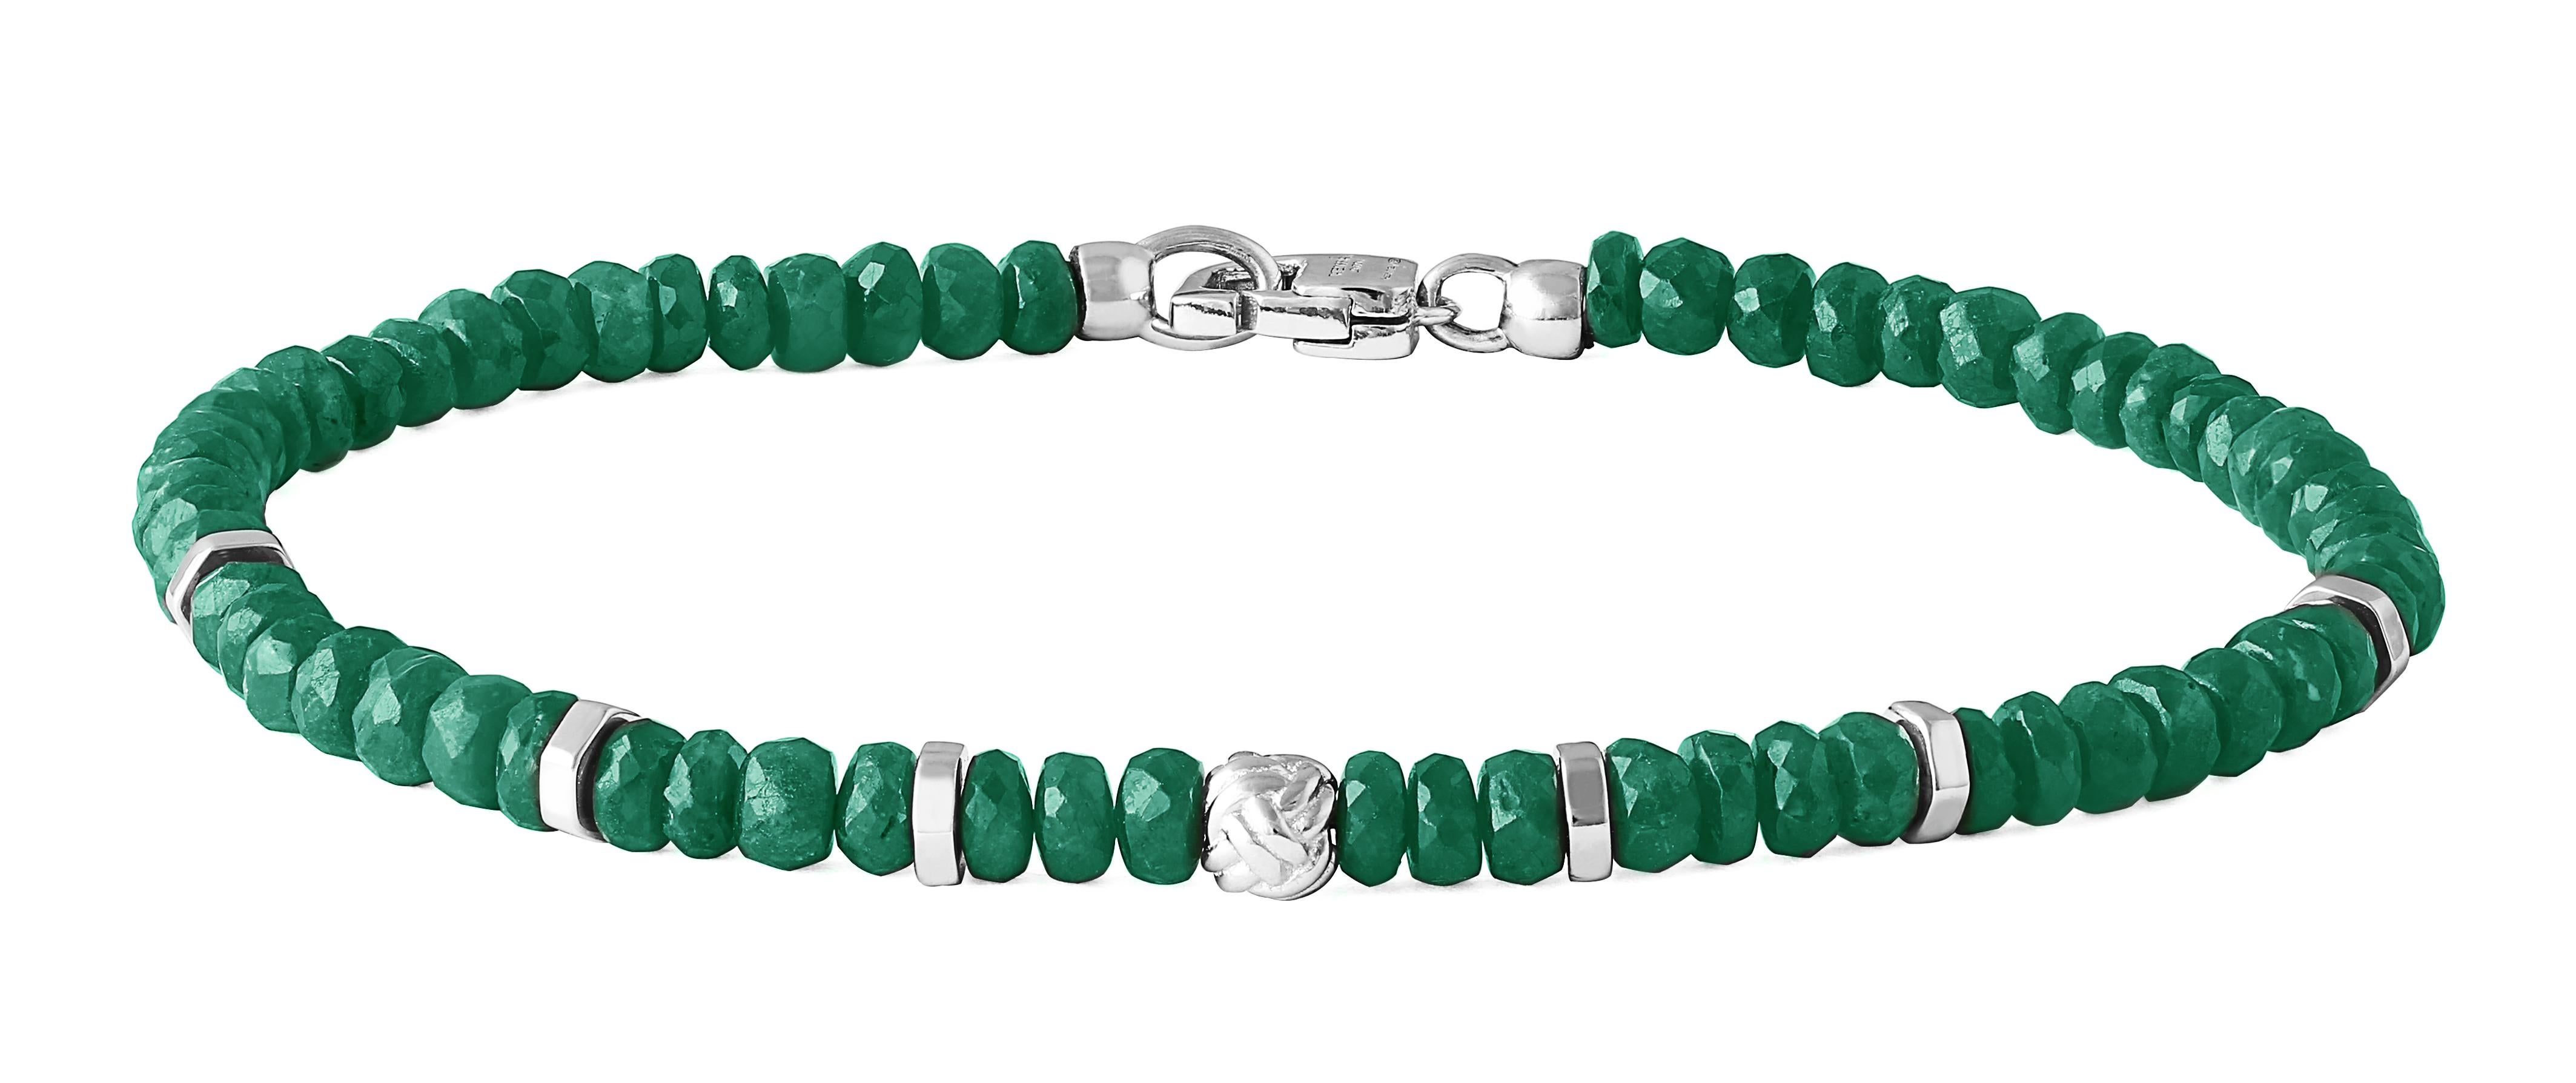 Tateossian continues to explore and find beauty in rare and less traditional precious stones. This hand strung beaded bracelet are made up of  precious Emerald faceted rondels, silver discs, a central silver knot bead and our signature Tateossian